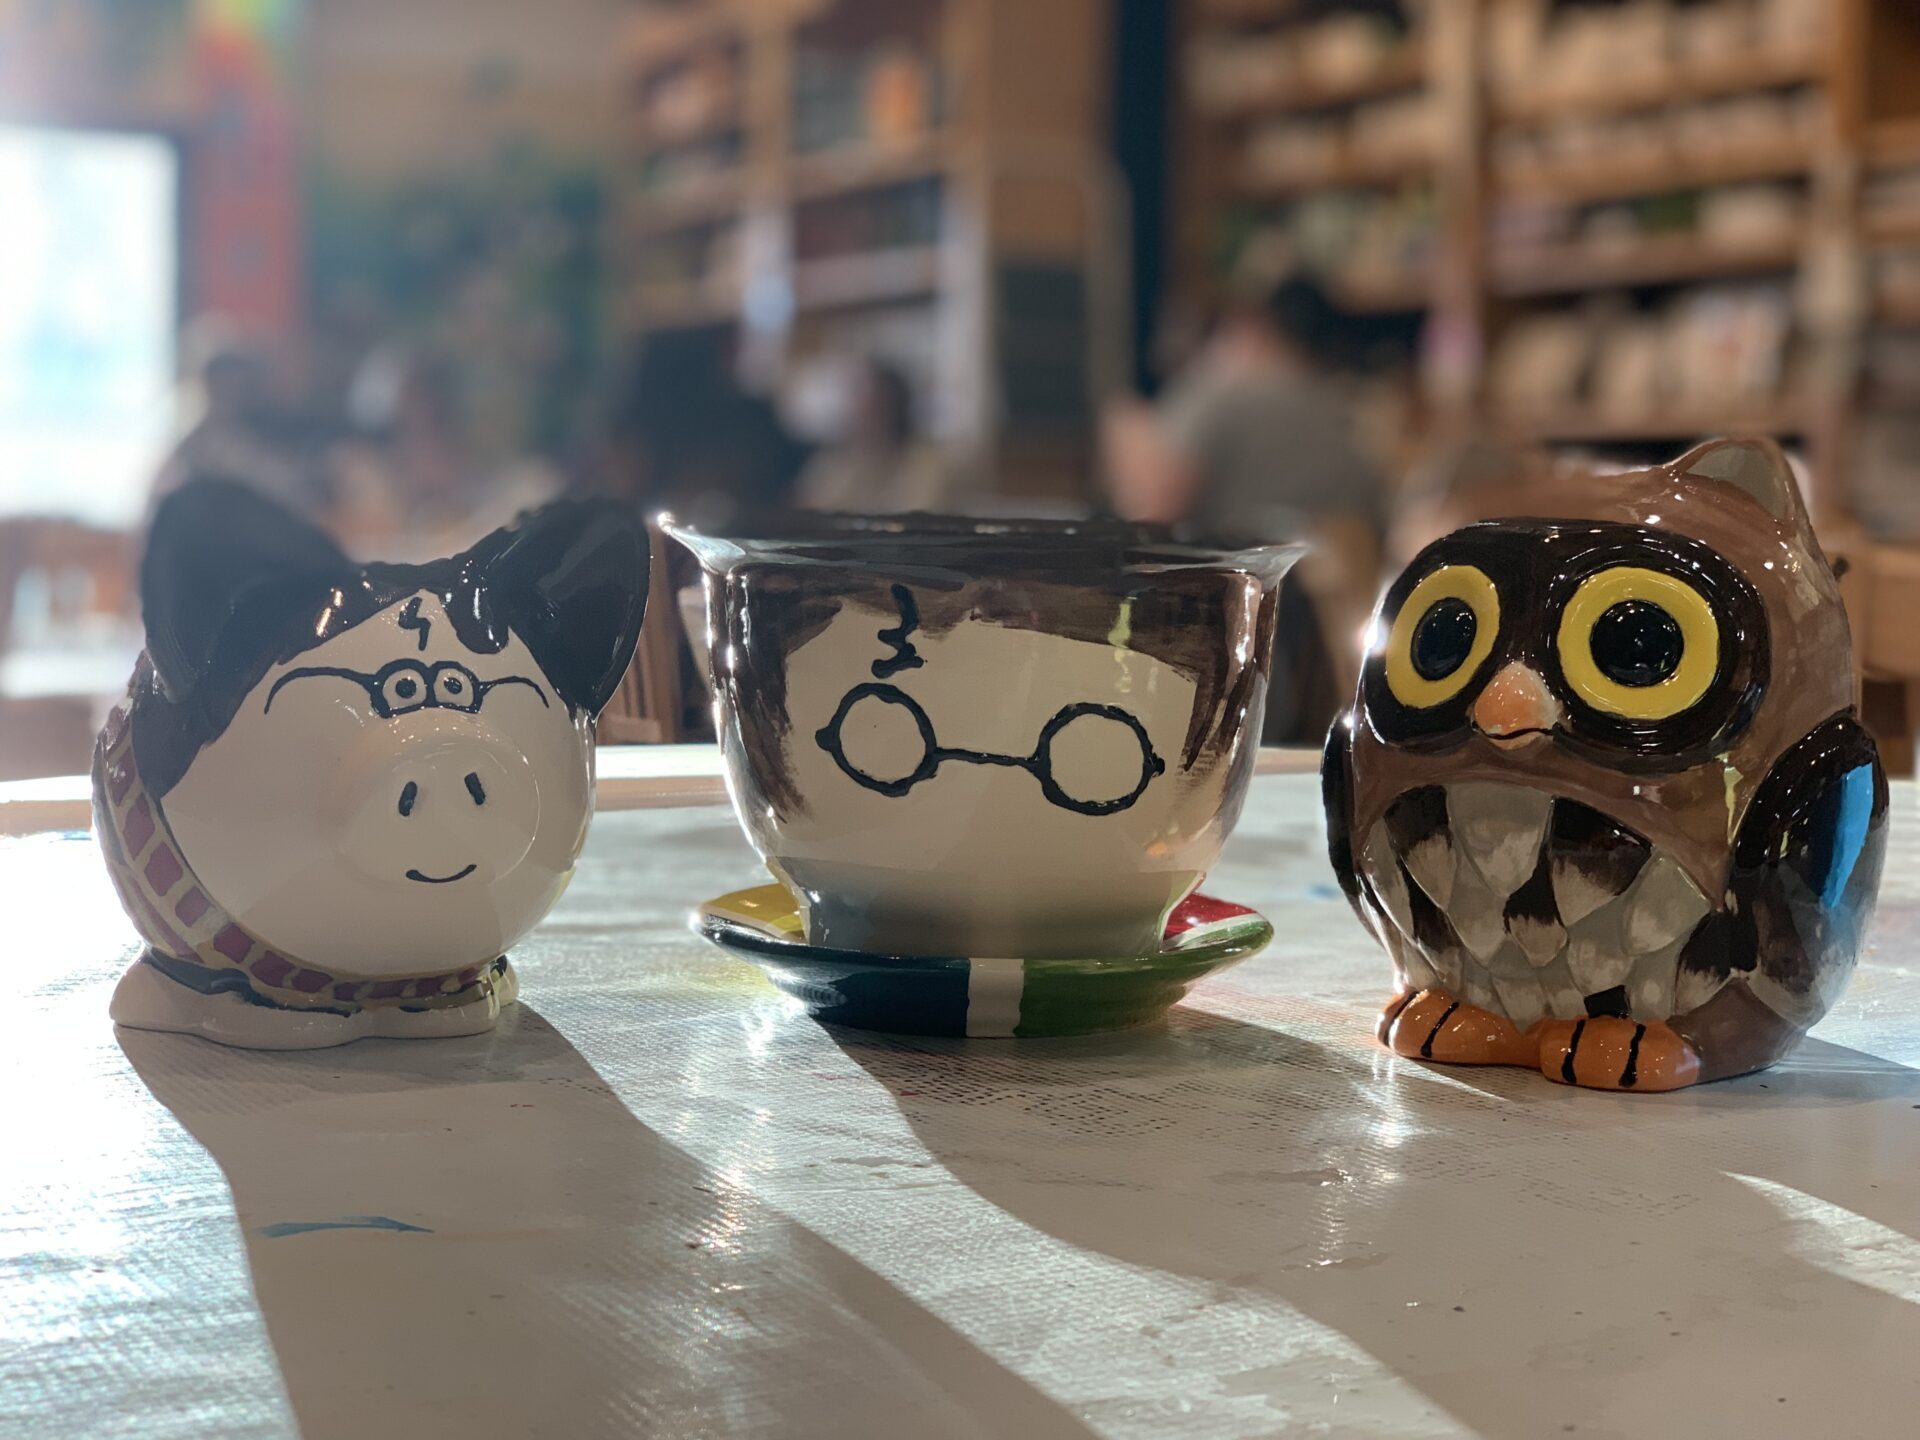 Clay mugs and tea cups with different designs